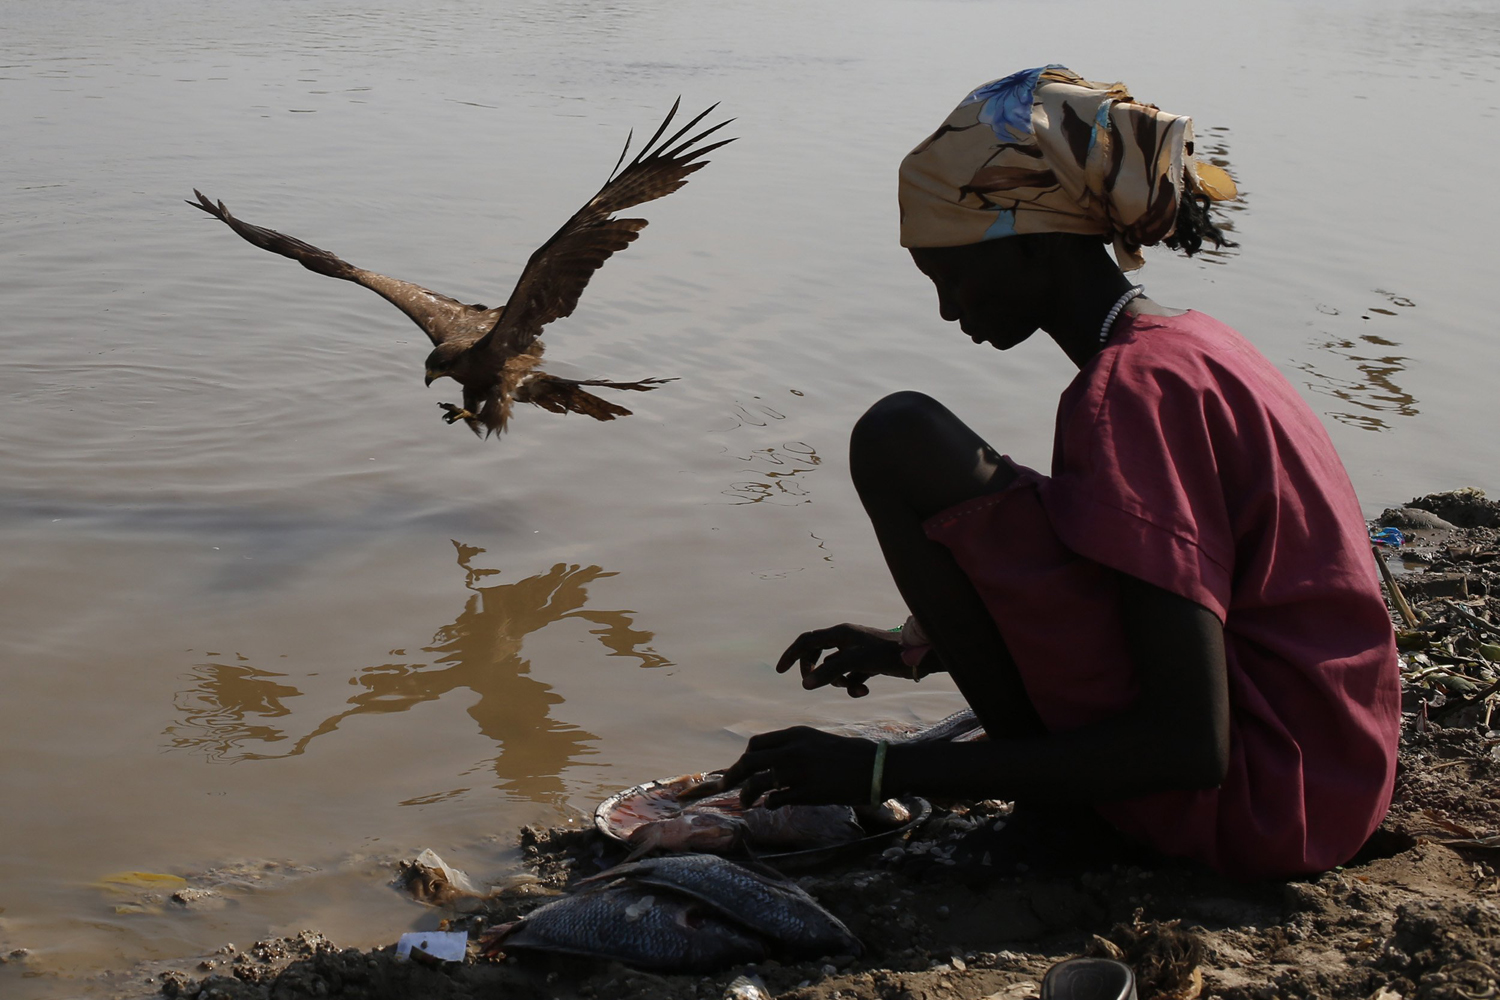 A falcon scavenges for scraps as a woman cleans fish at the banks of Sobat river in Upper Nile State